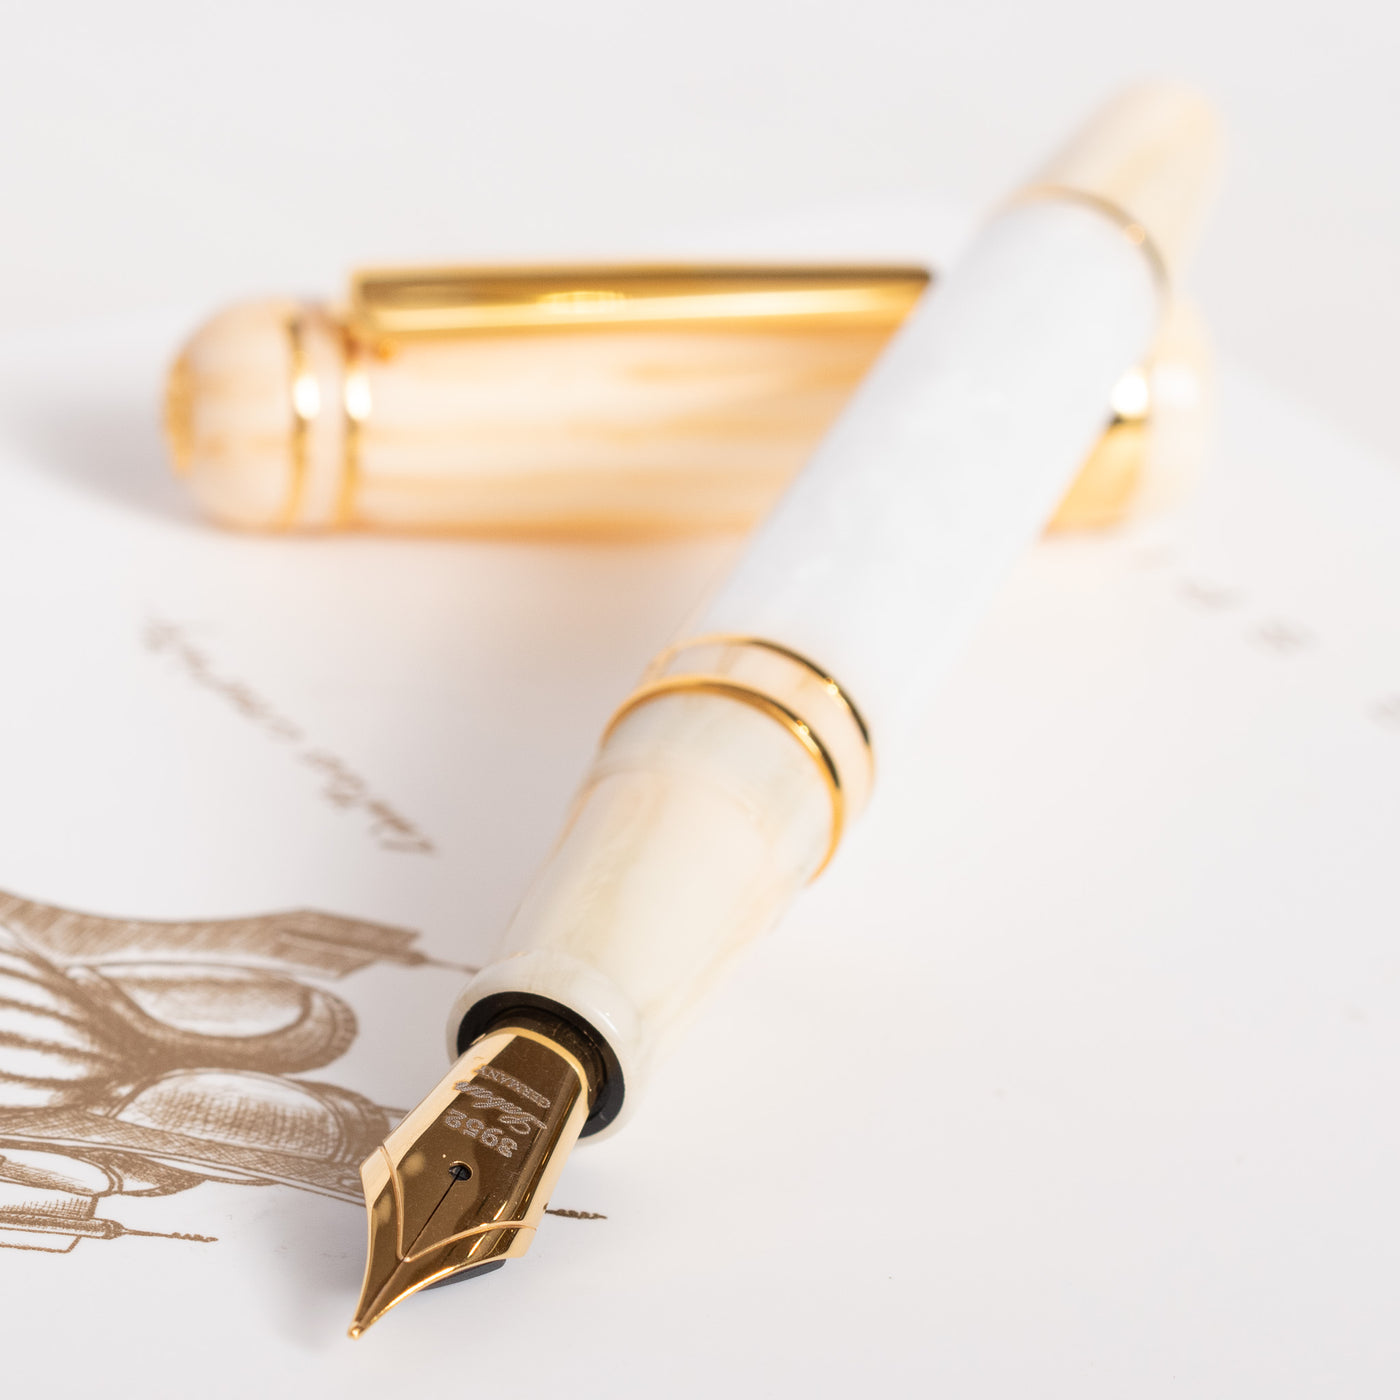 Laban 325 Fountain Pen - Snow gold accents